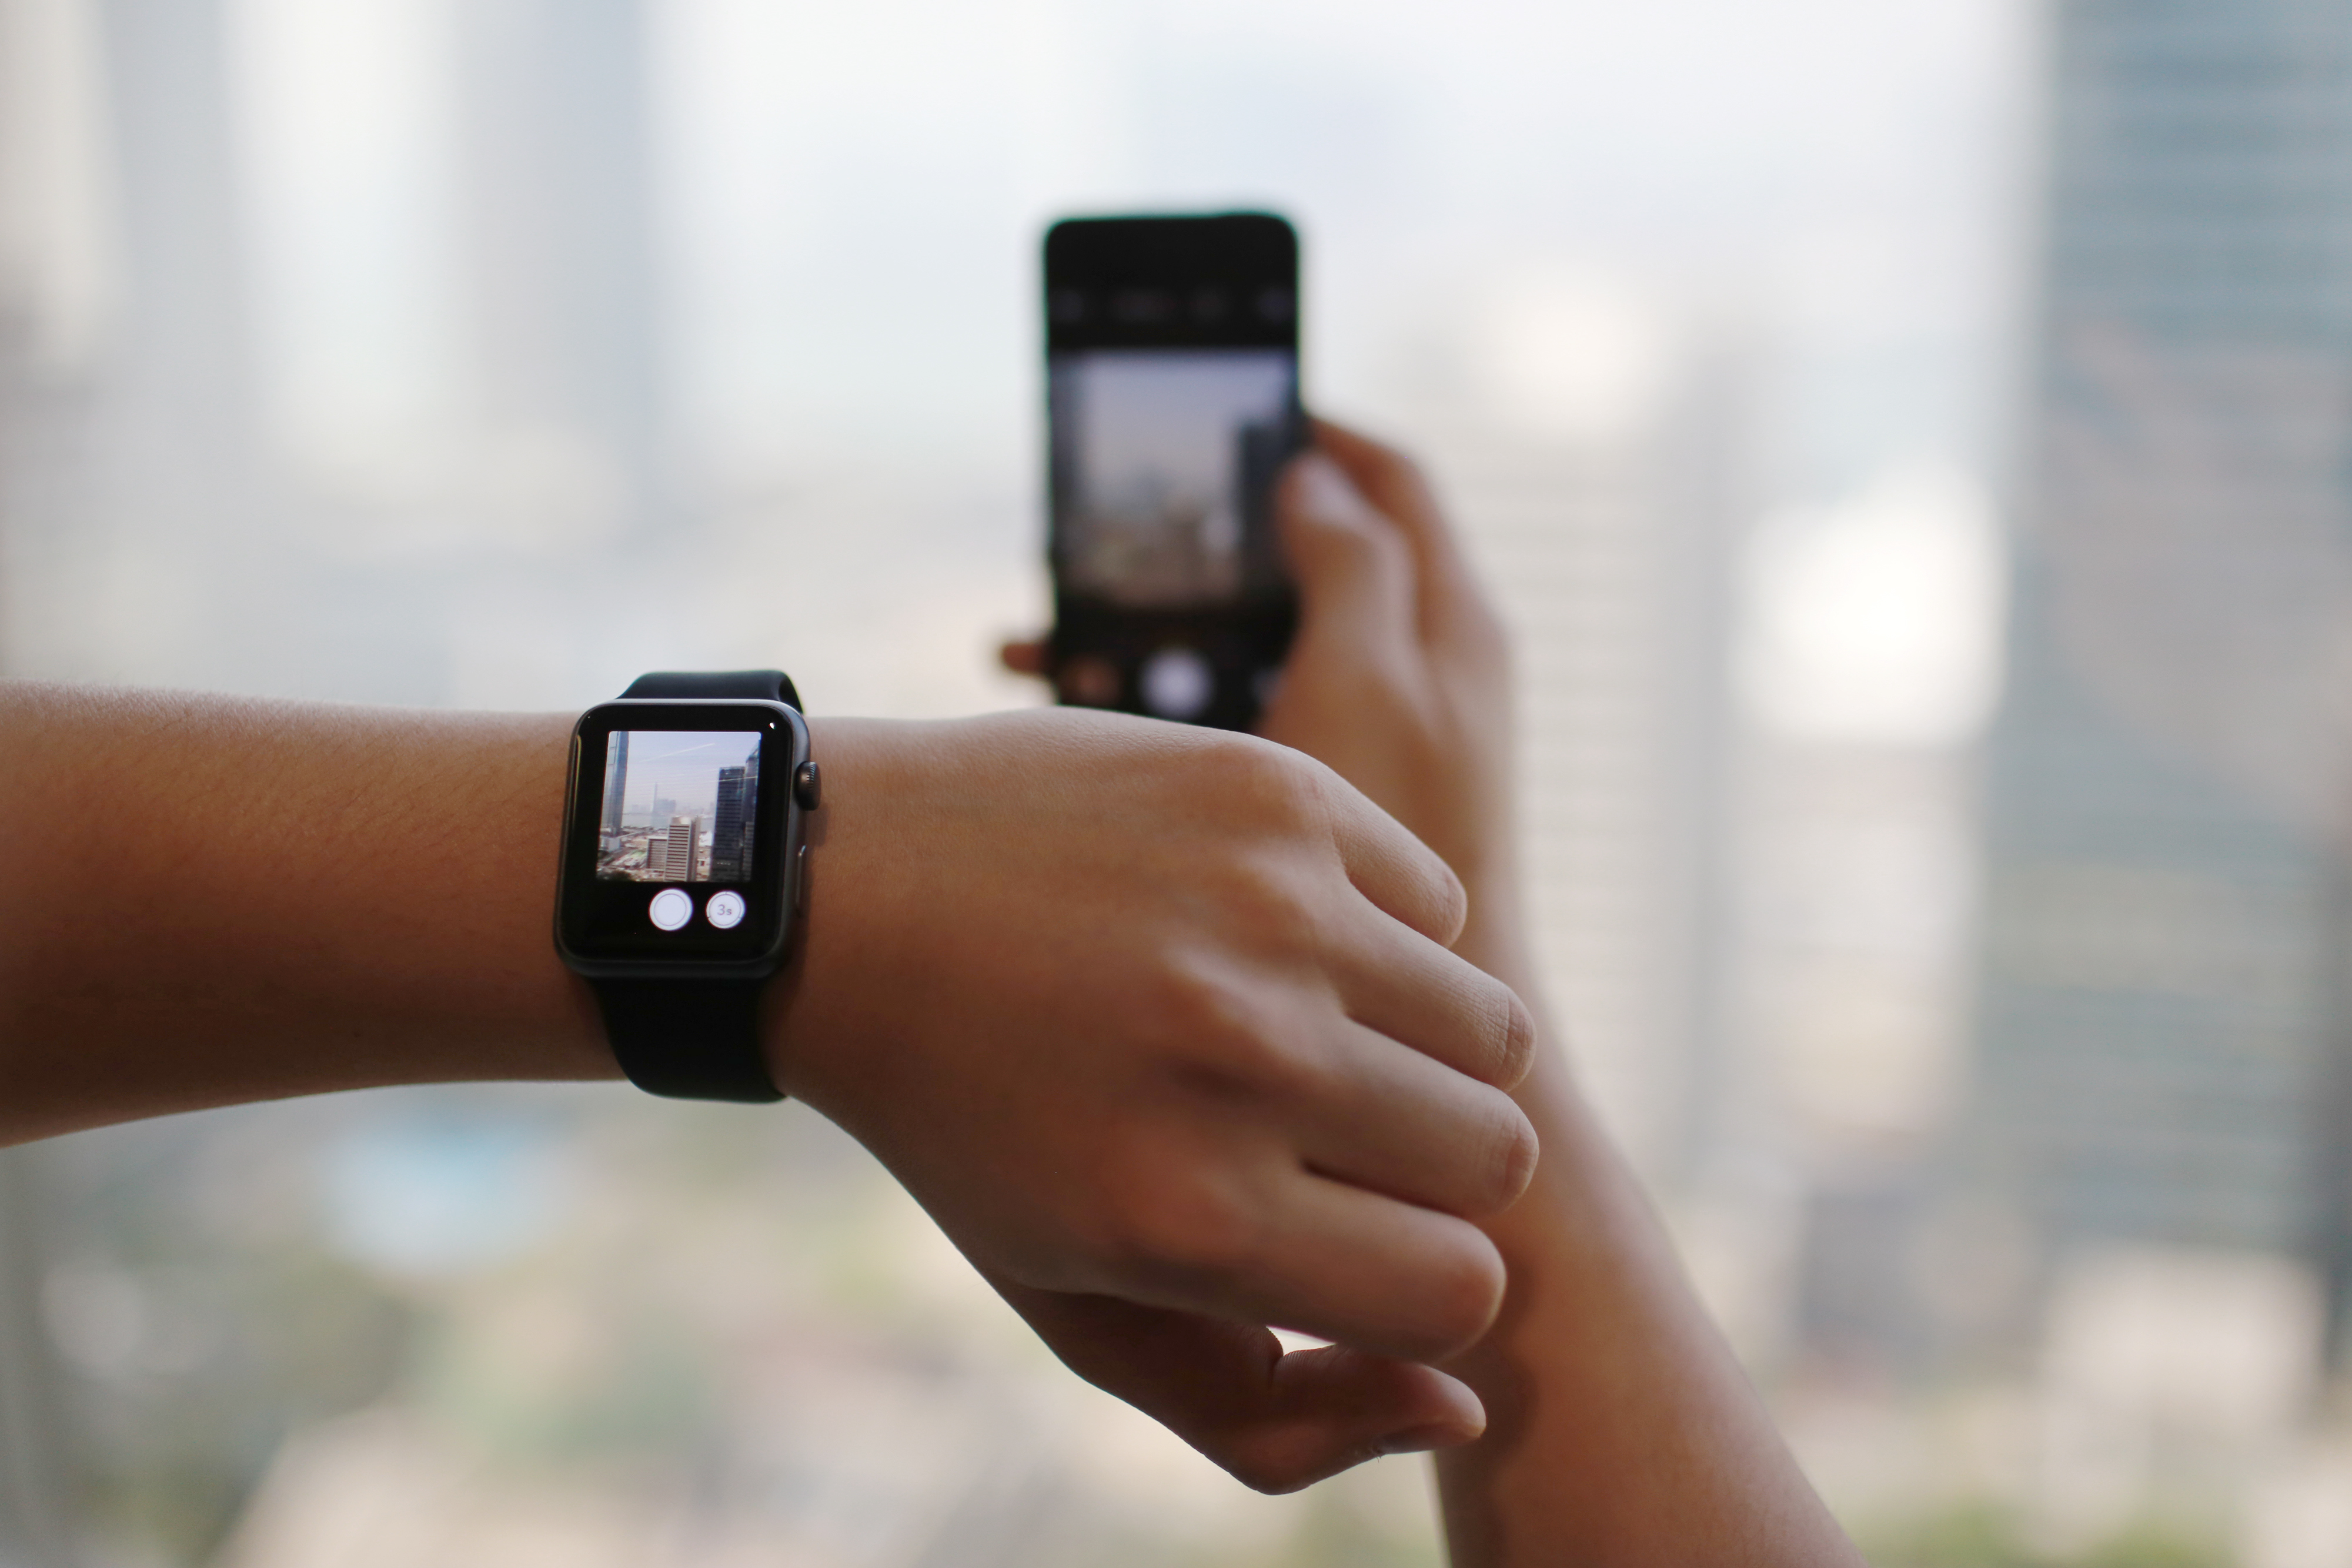 A man uses the remote camera function on an Apple Watch Sport smartwatch as he holds an Apple iPhone 5s smartphone in an arranged photograph in Hong Kong, April 24, 2015. (Bloomberg — Getty Images)